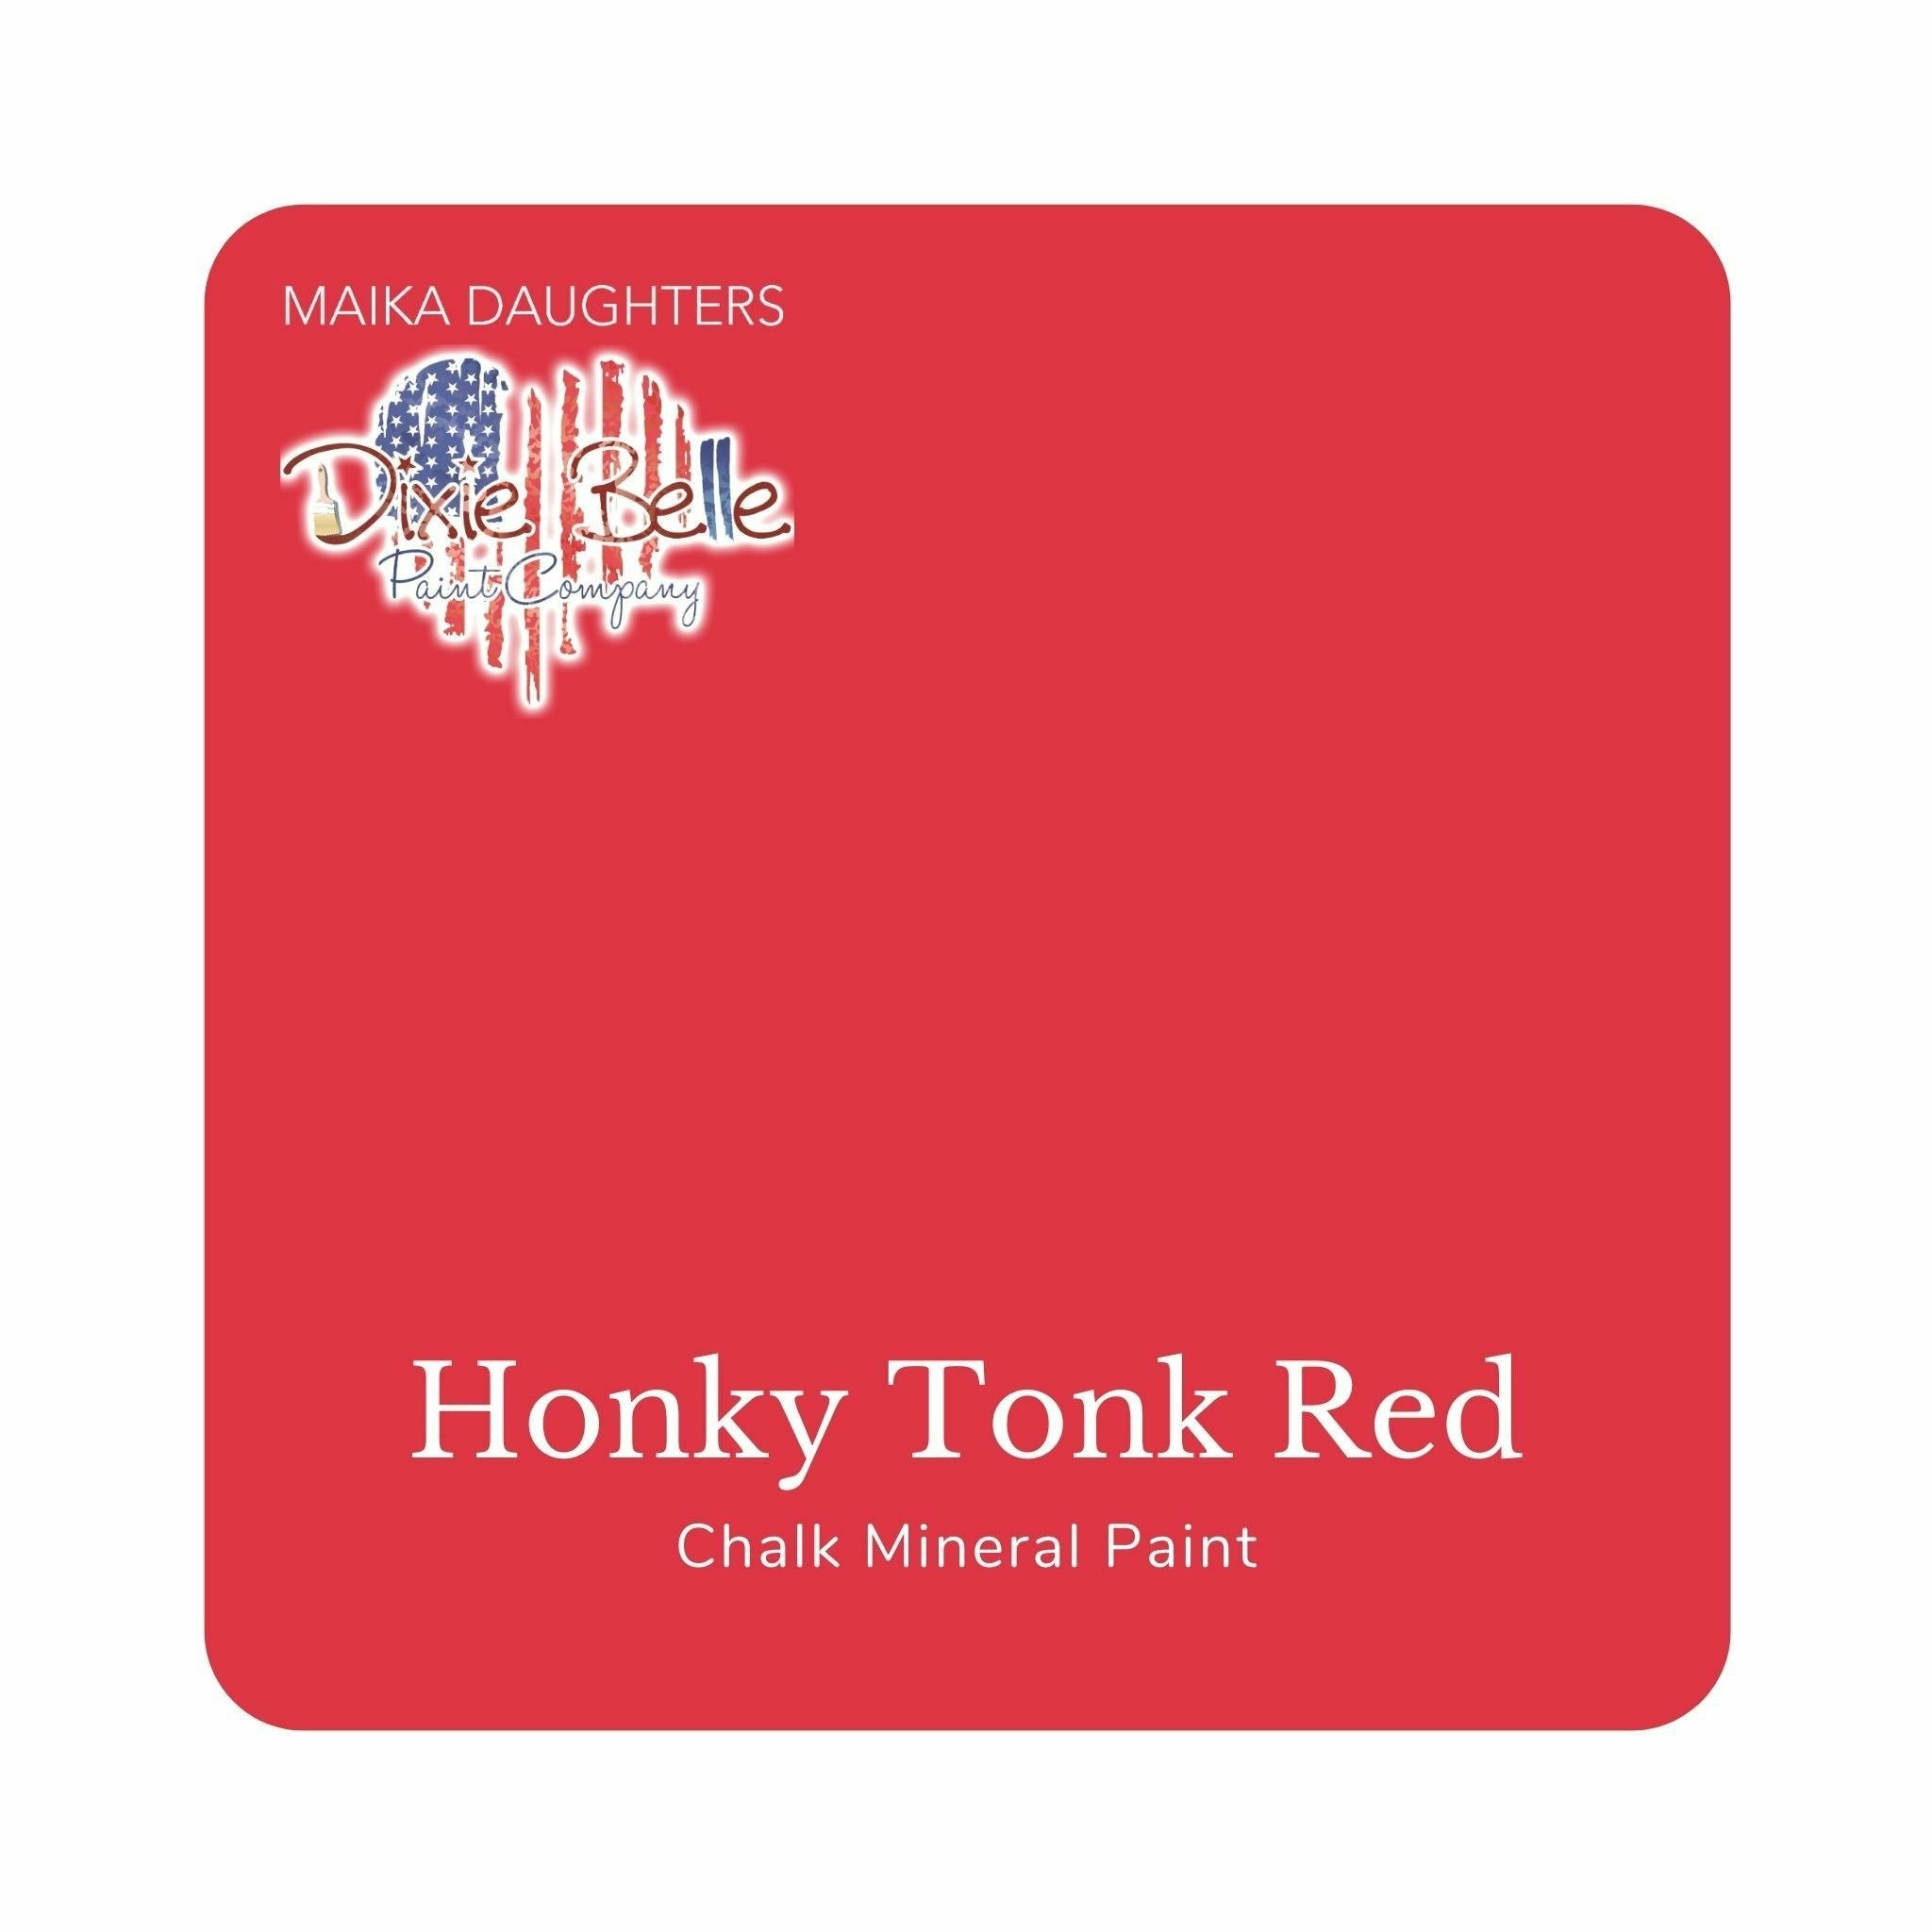 A square swatch card of Dixie Belle Paint Company’s Honky Tonk Red Chalk Mineral Paint is against a white background. This color is a red coral rose.